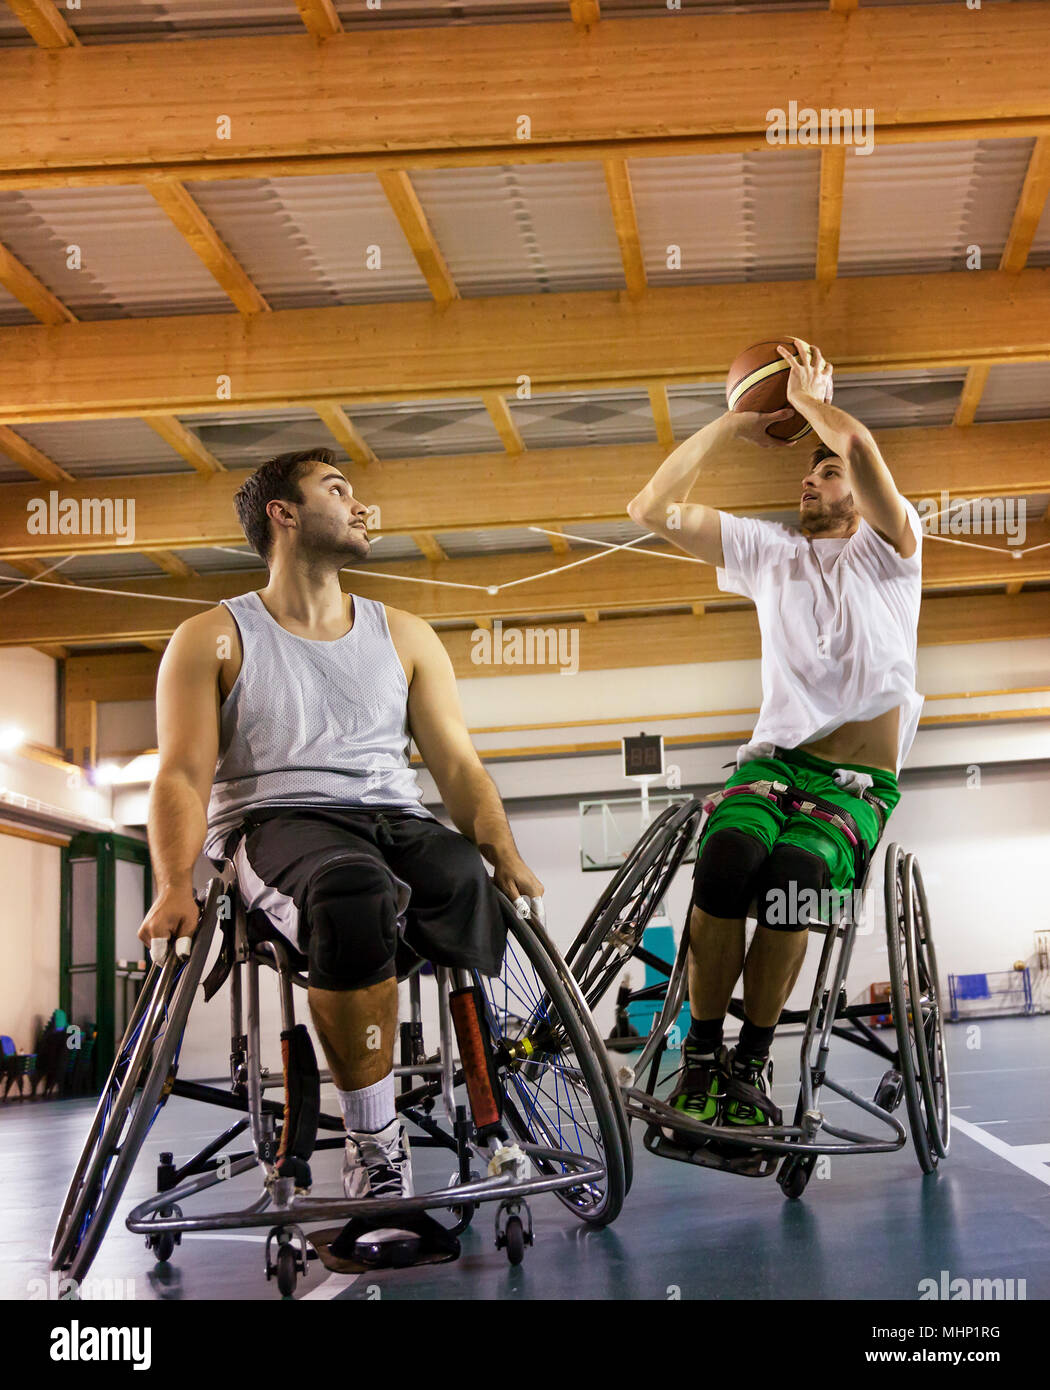 disabled sport men in action while playing indoor basketball at a basketball court Stock Photo